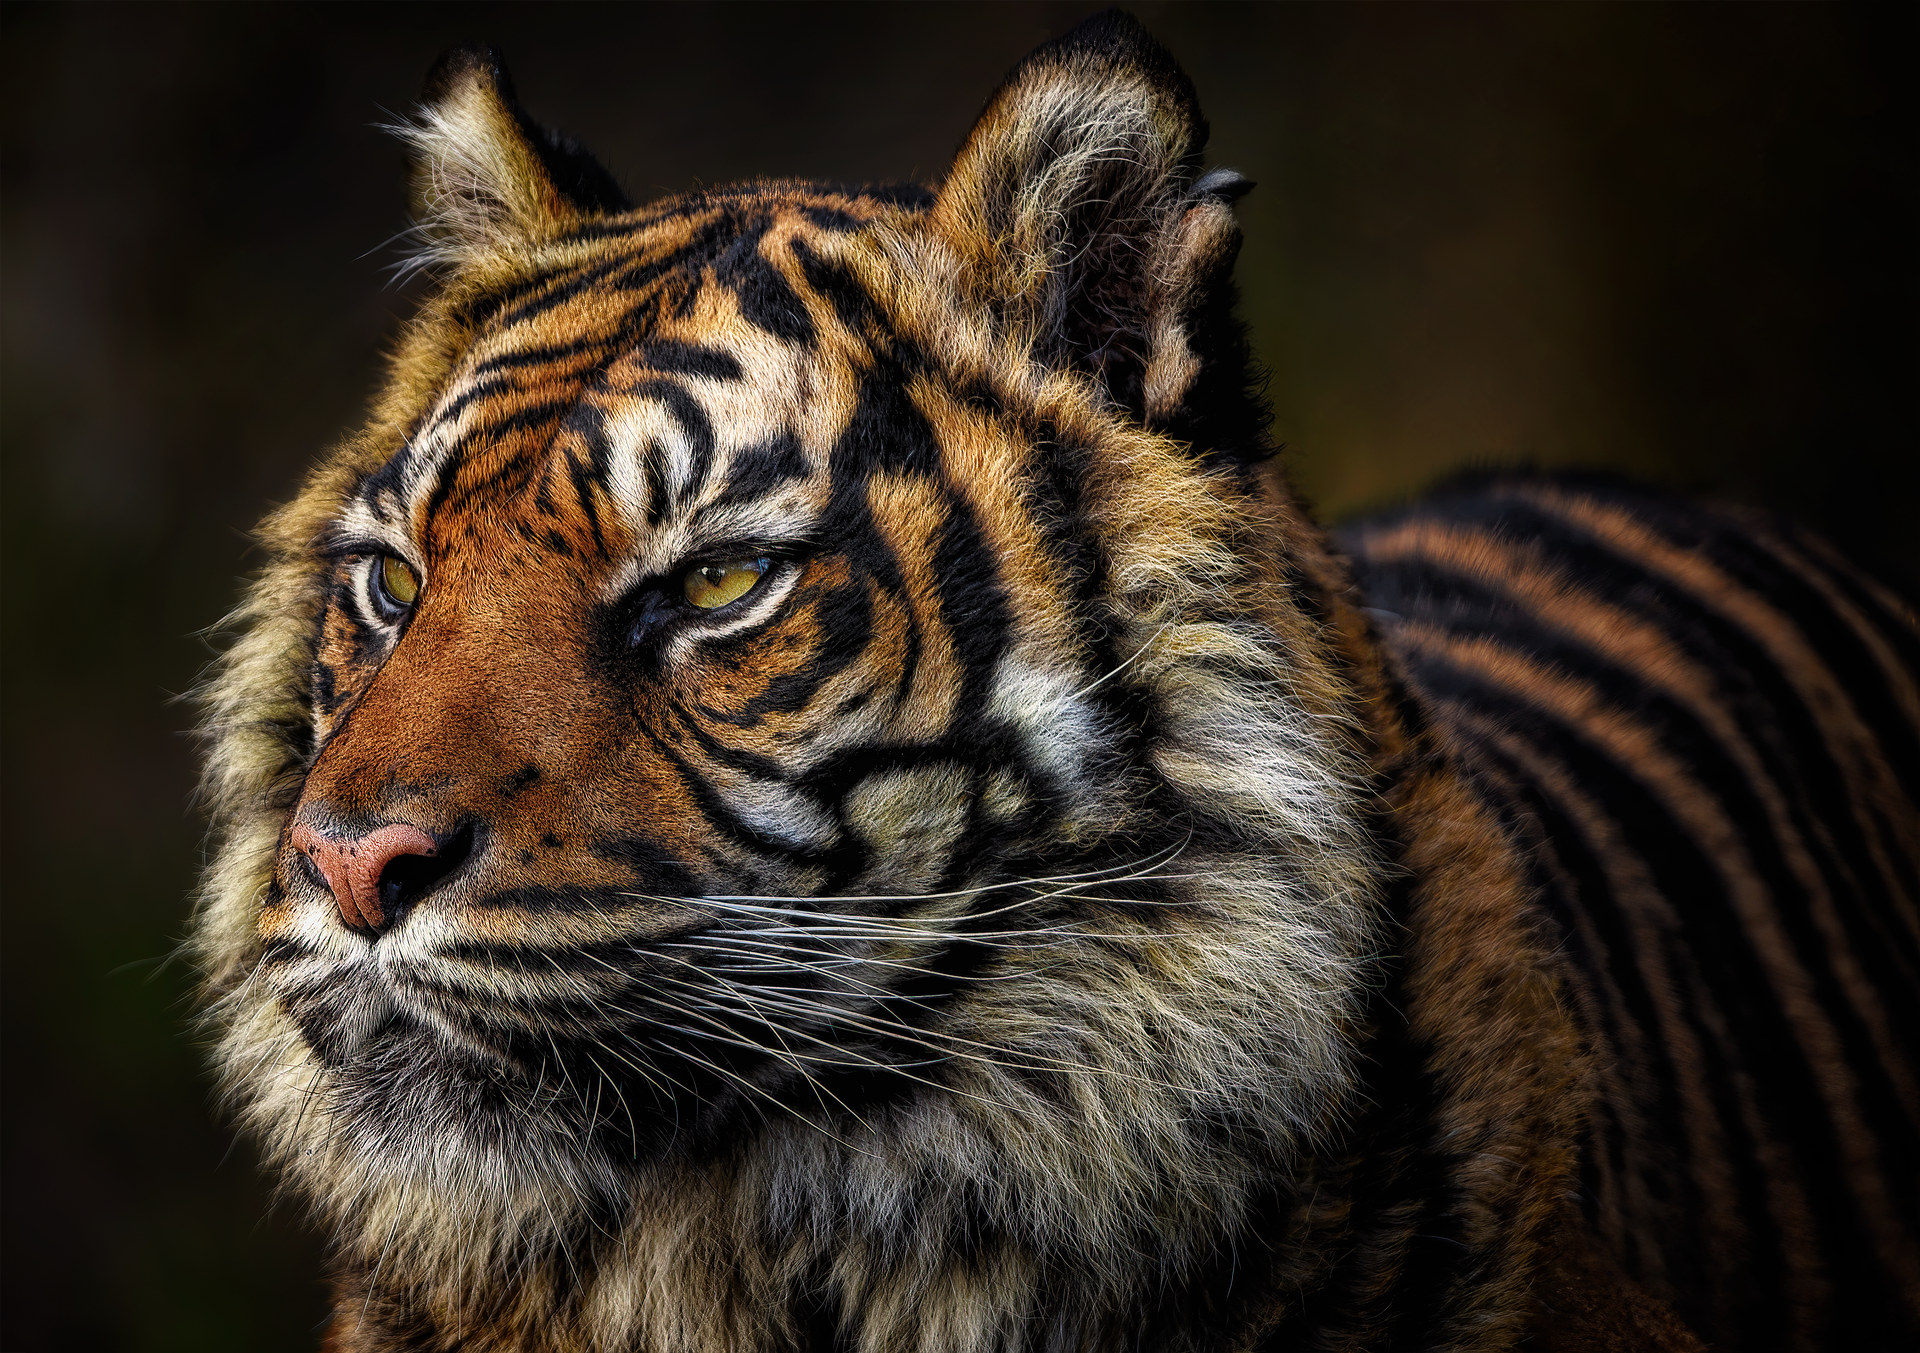 Tiger Captions for Instagram: Roar with Captivating Messages